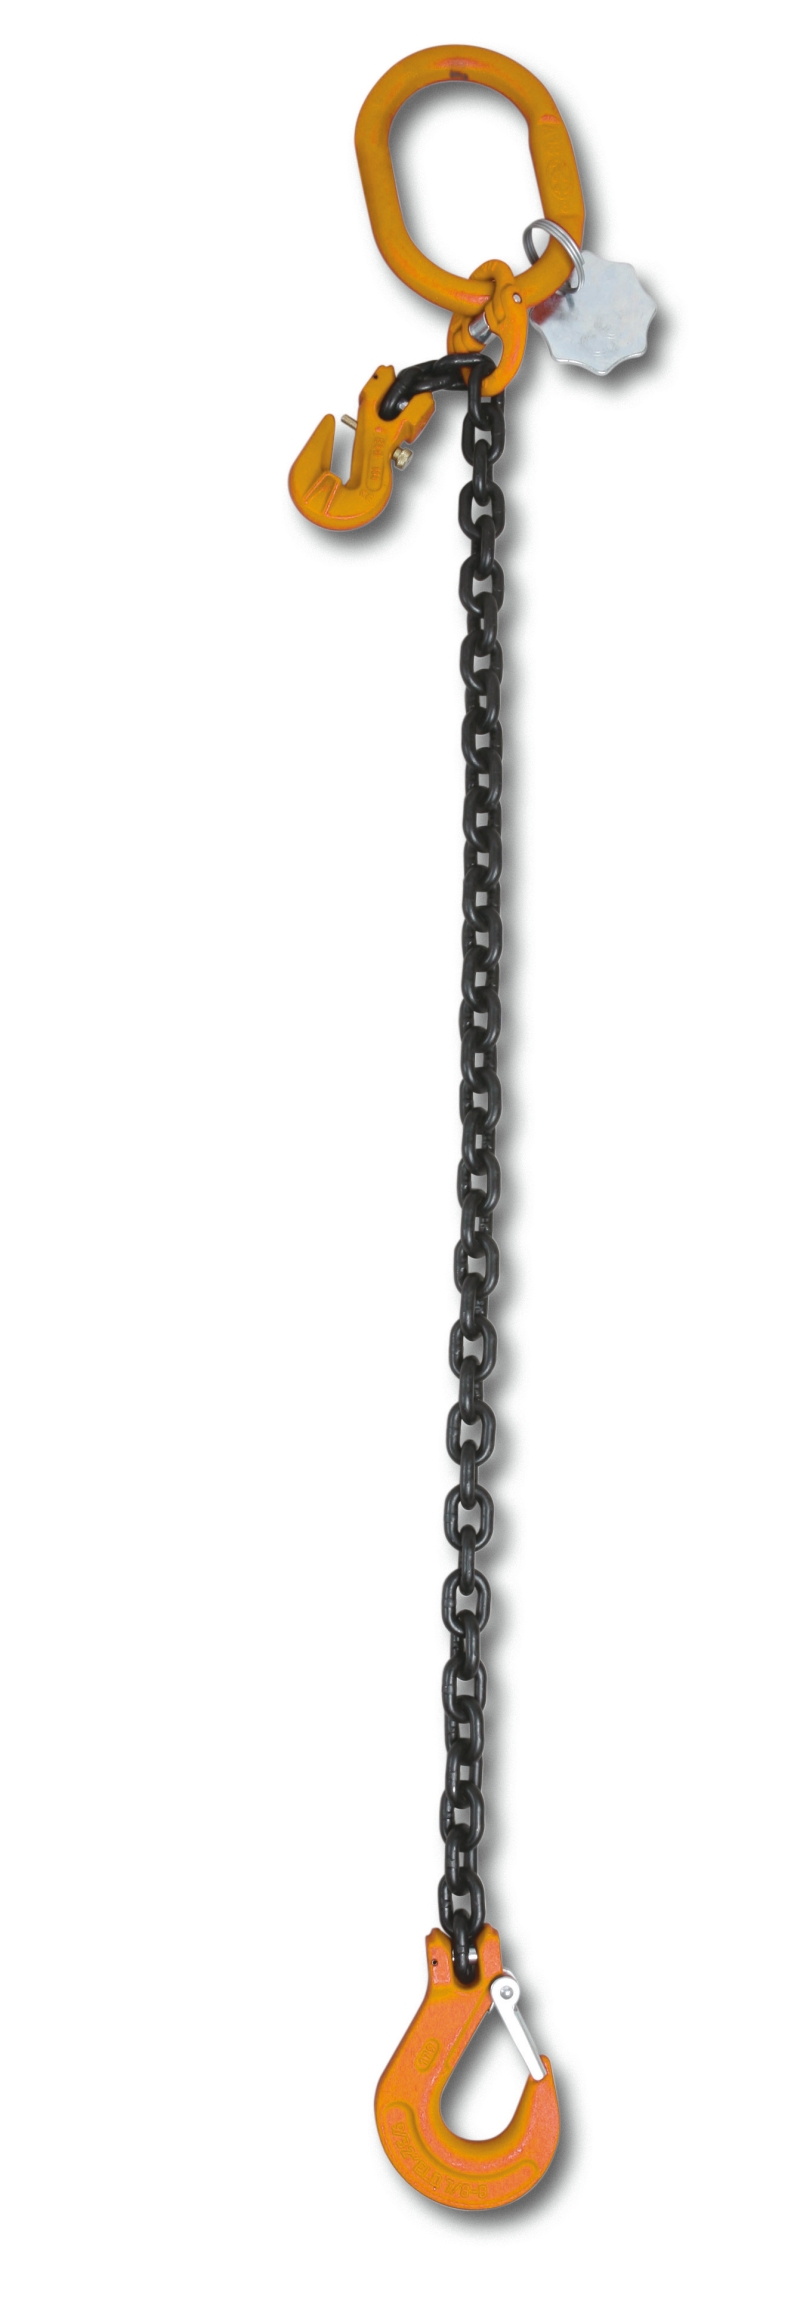 Lifting chain sling, 1 leg with clevis grab hook, grade 8 category image